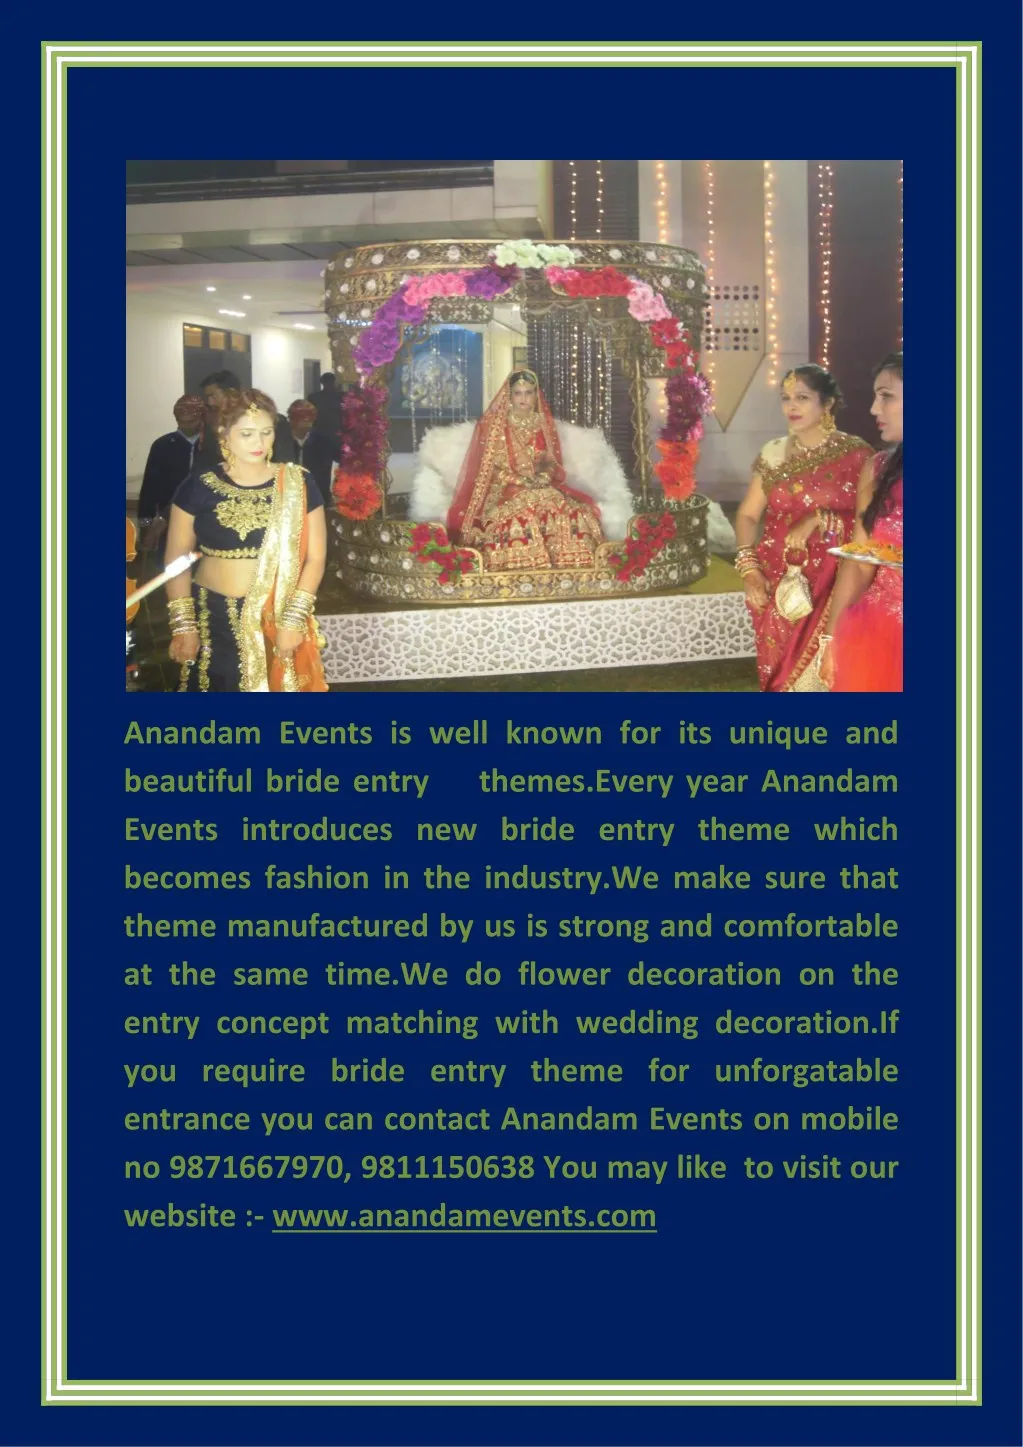 anandam events is well known for its unique